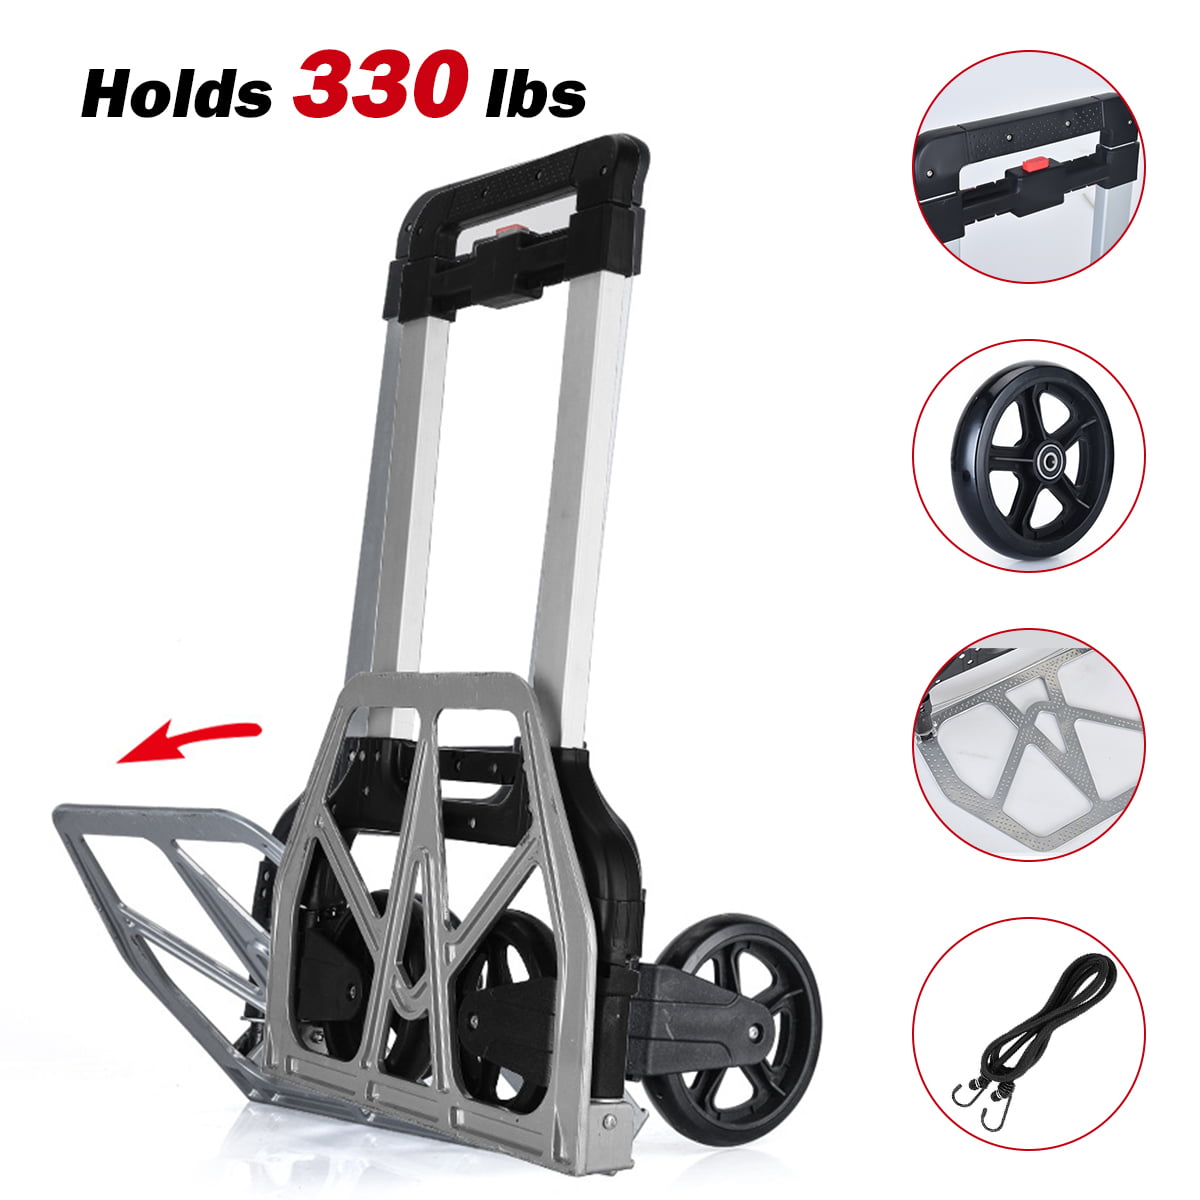 Kemanner Portable Heavy Duty Aluminum Folding Hand Truck and Dolly Two-Wheel Luggage Cart for Personal Support 150lbs Capacity Moving Travel and Shopping Use 